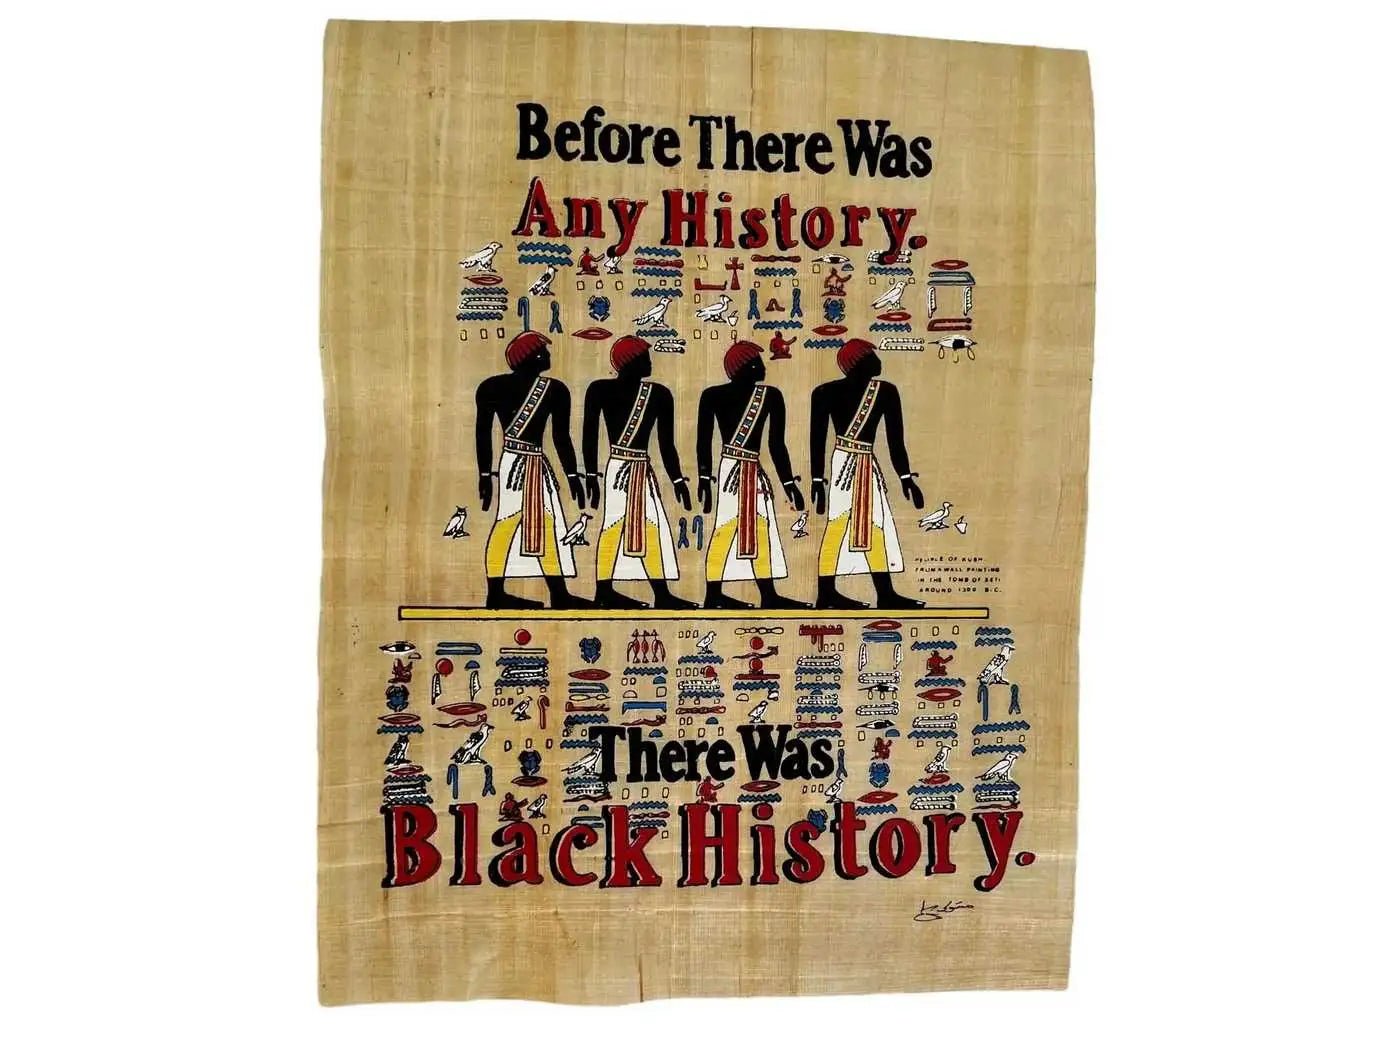 Black History - Before There Was any History There Was Black History - Egyptian Papyrus Painting Authentic Papyrus Art